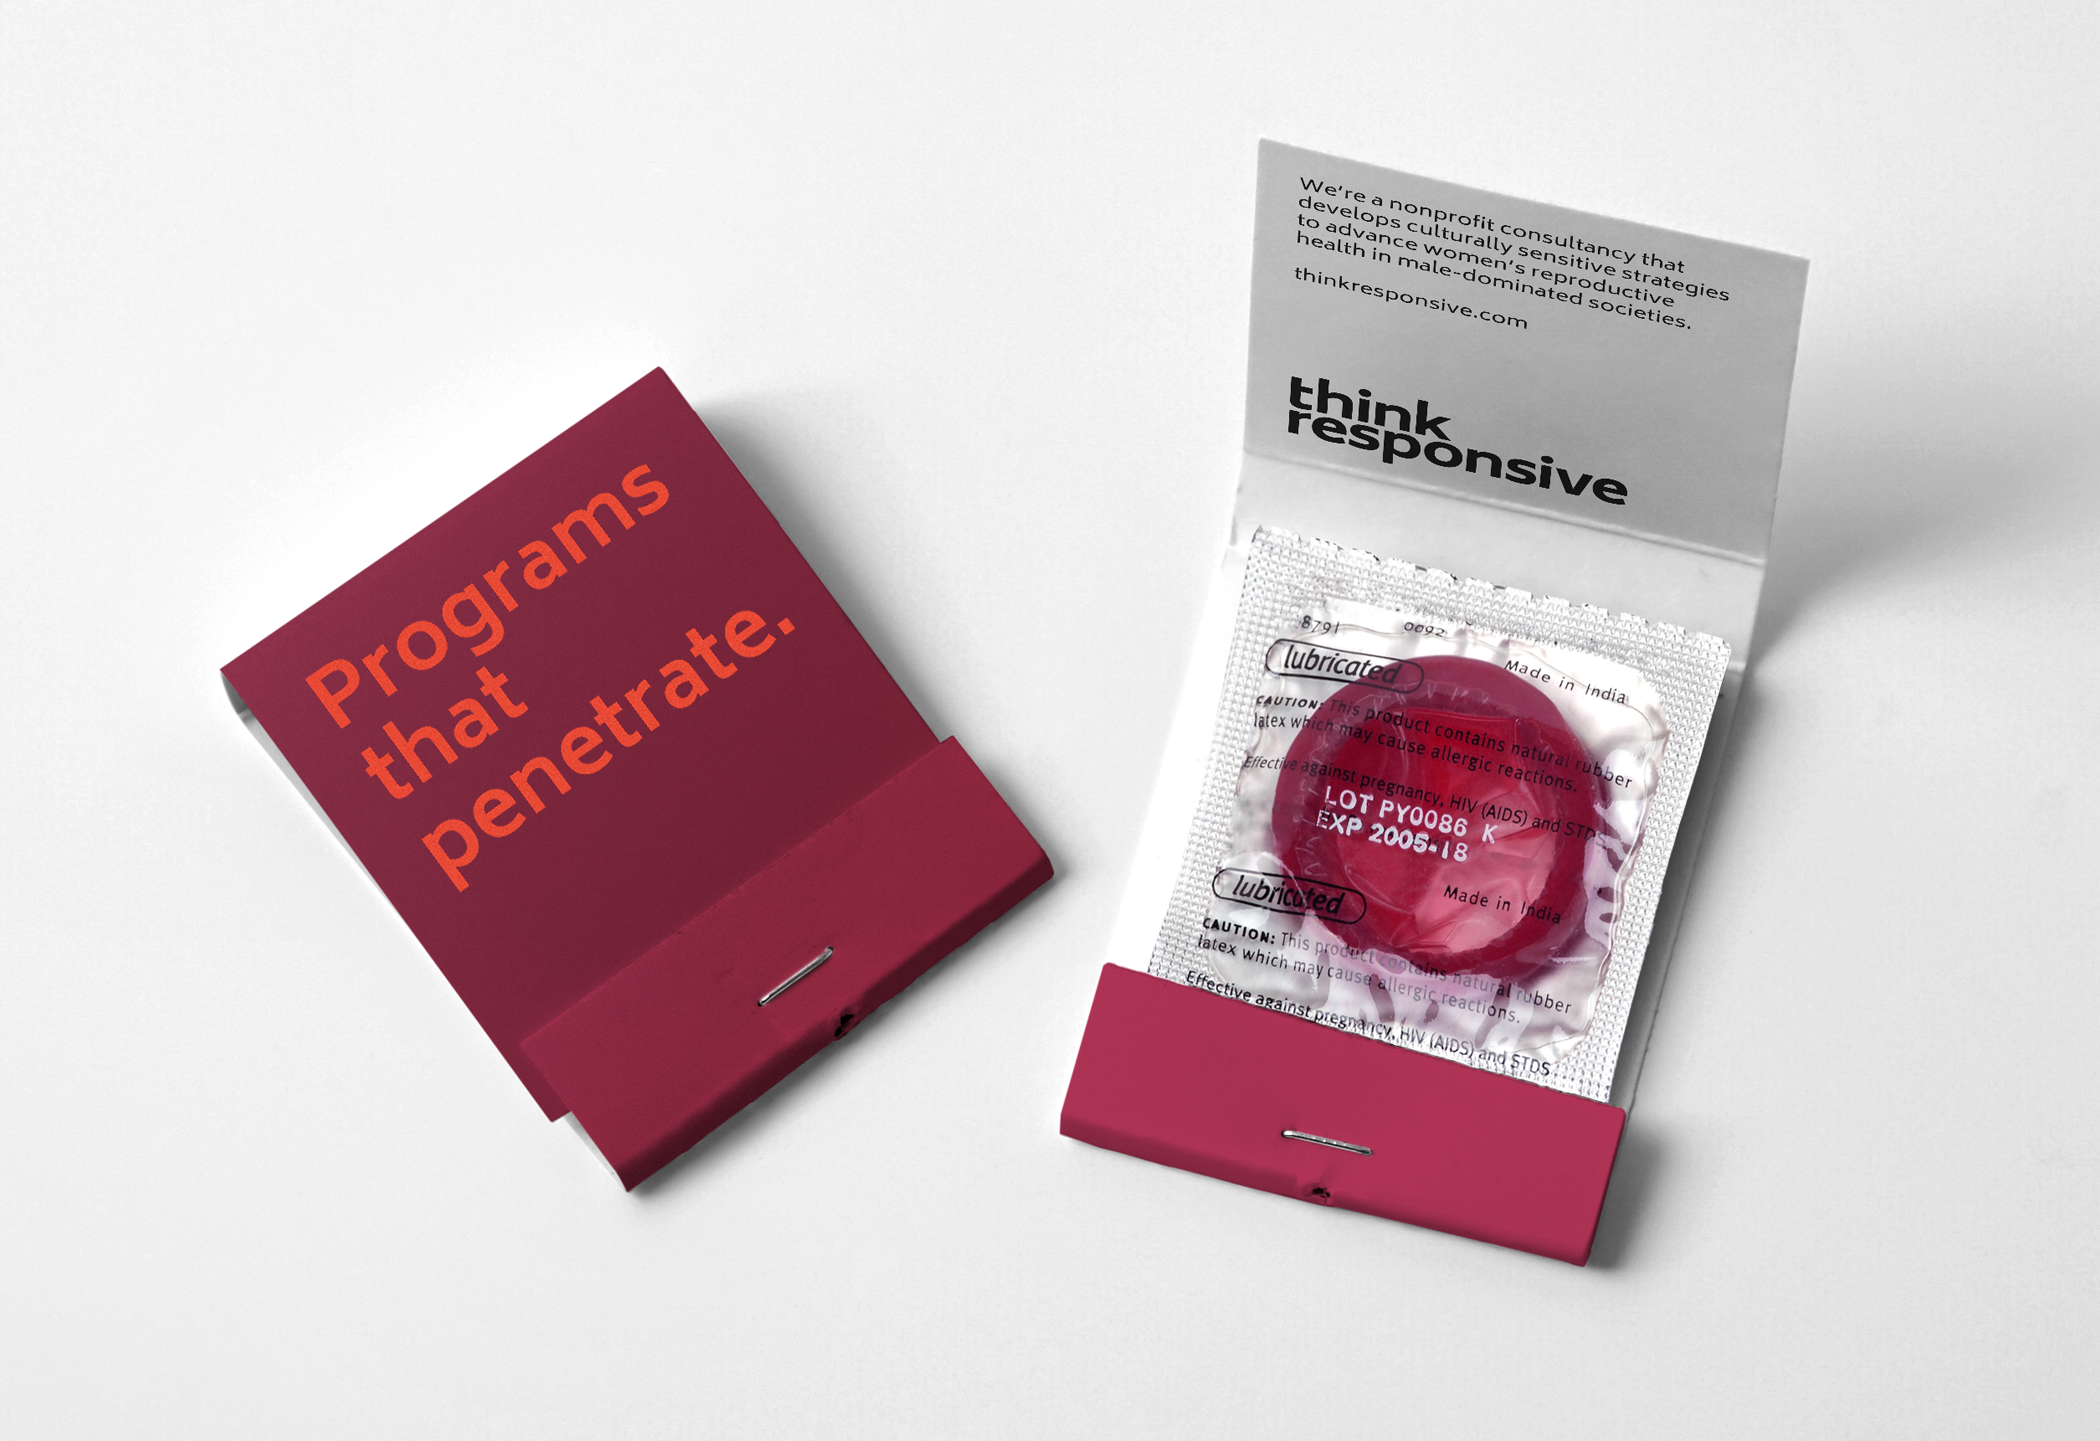 A Think Responsive branded condom package with the text "Programs that penetrate."